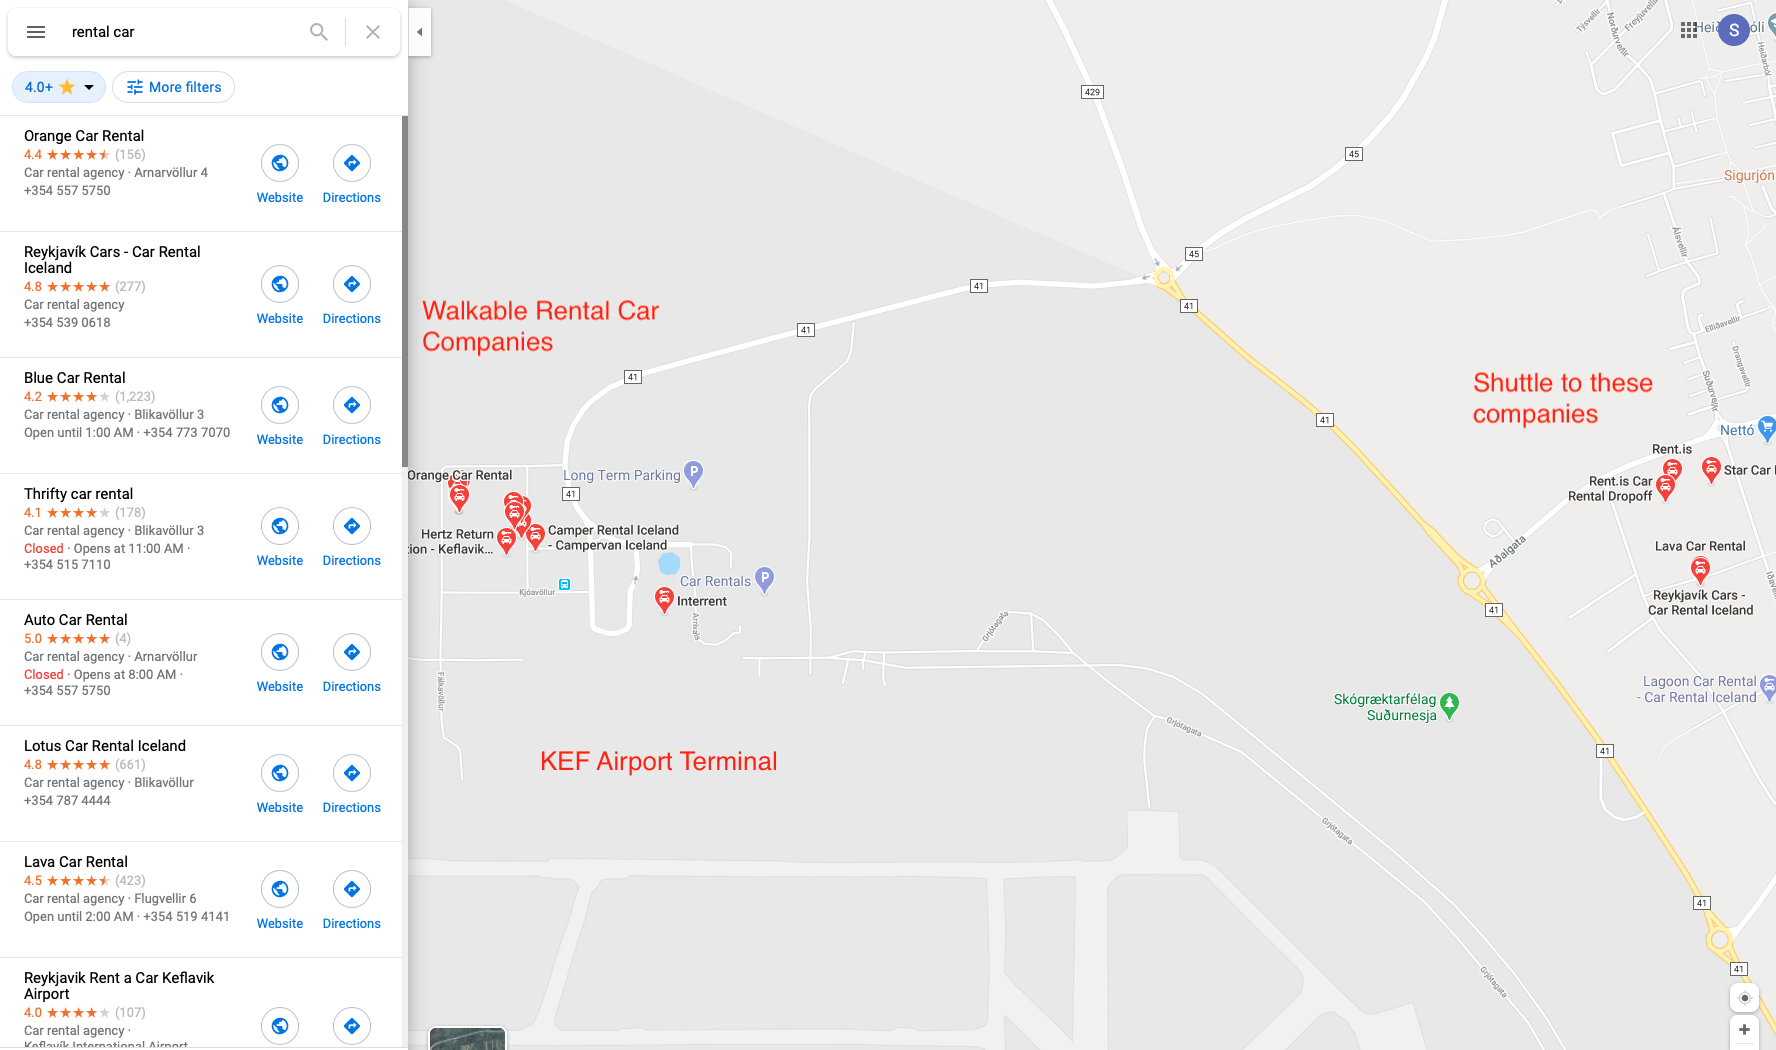 Map of Iceland Rental Car Companies with Google Reviews